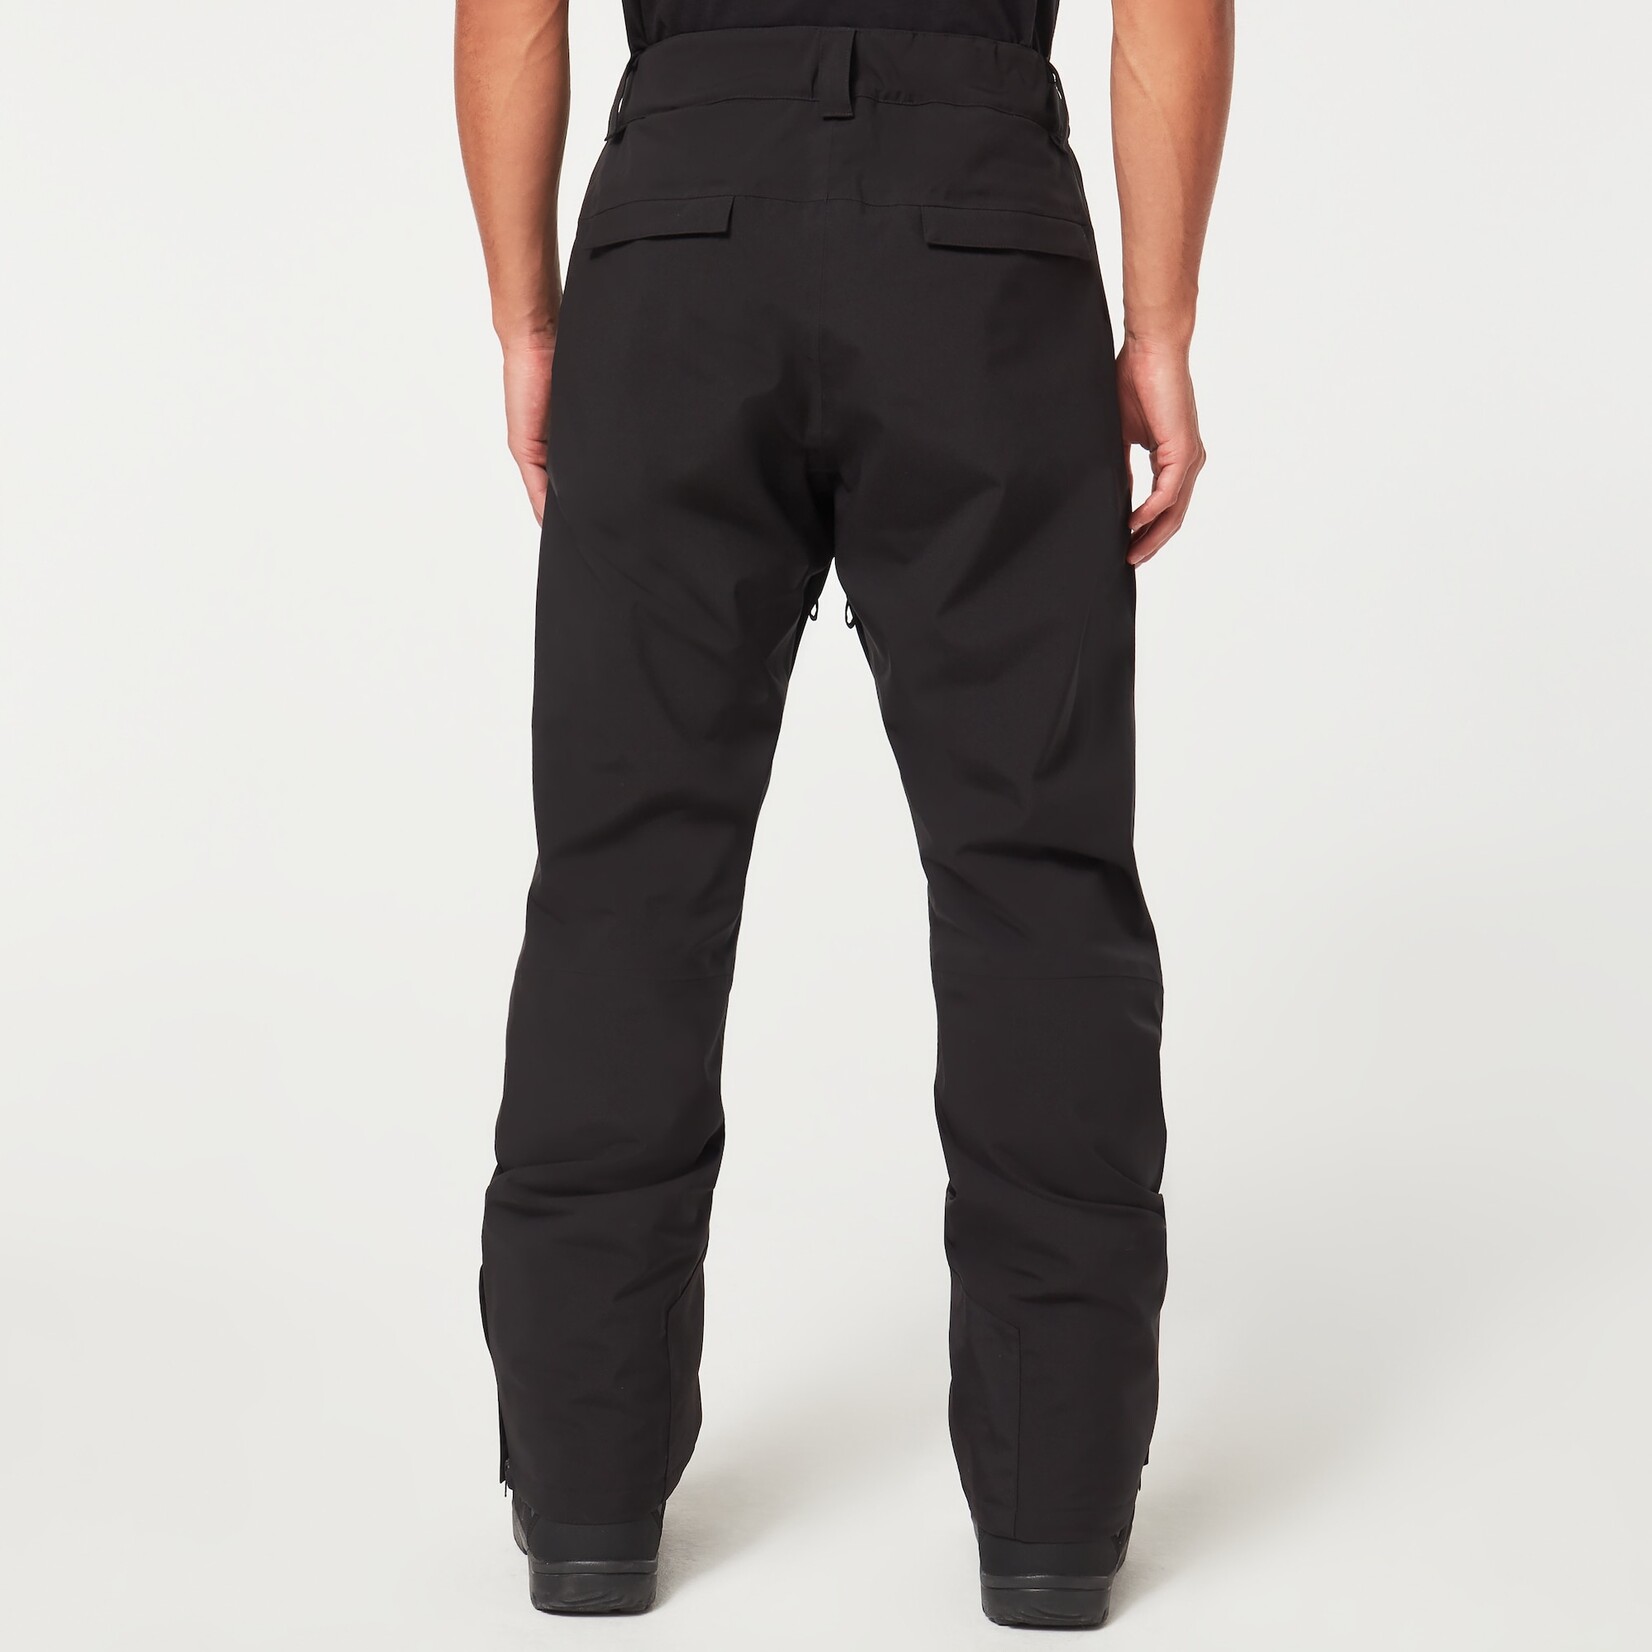 OAKLEY AXIS INSULATED PANT - 23/24